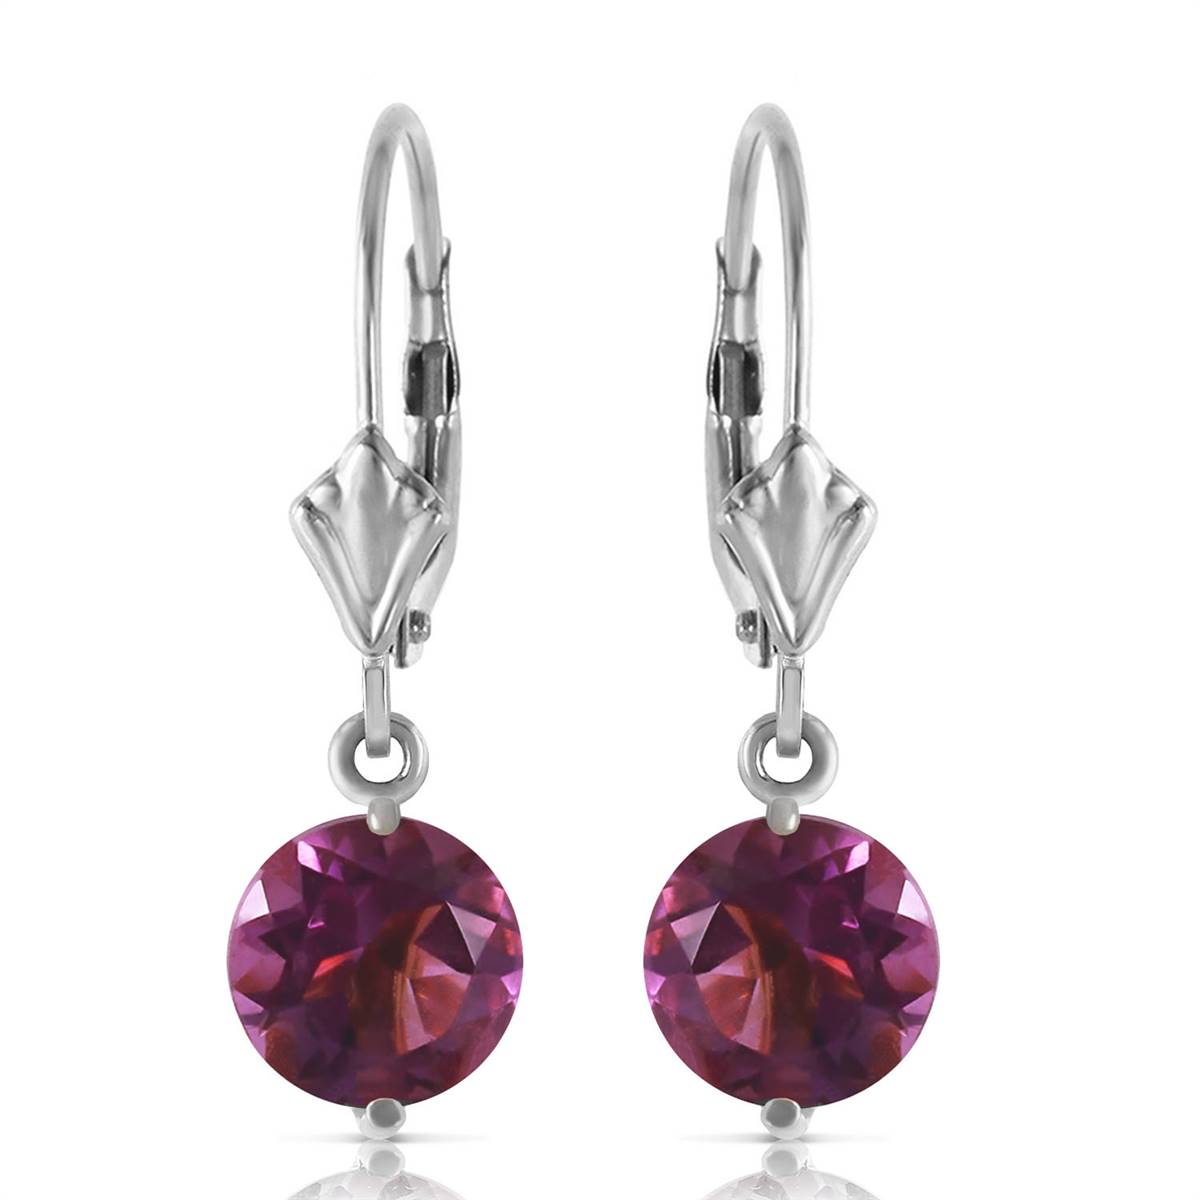 3.1 Carat 14K Solid White Gold Gifted Amethyst Earrings